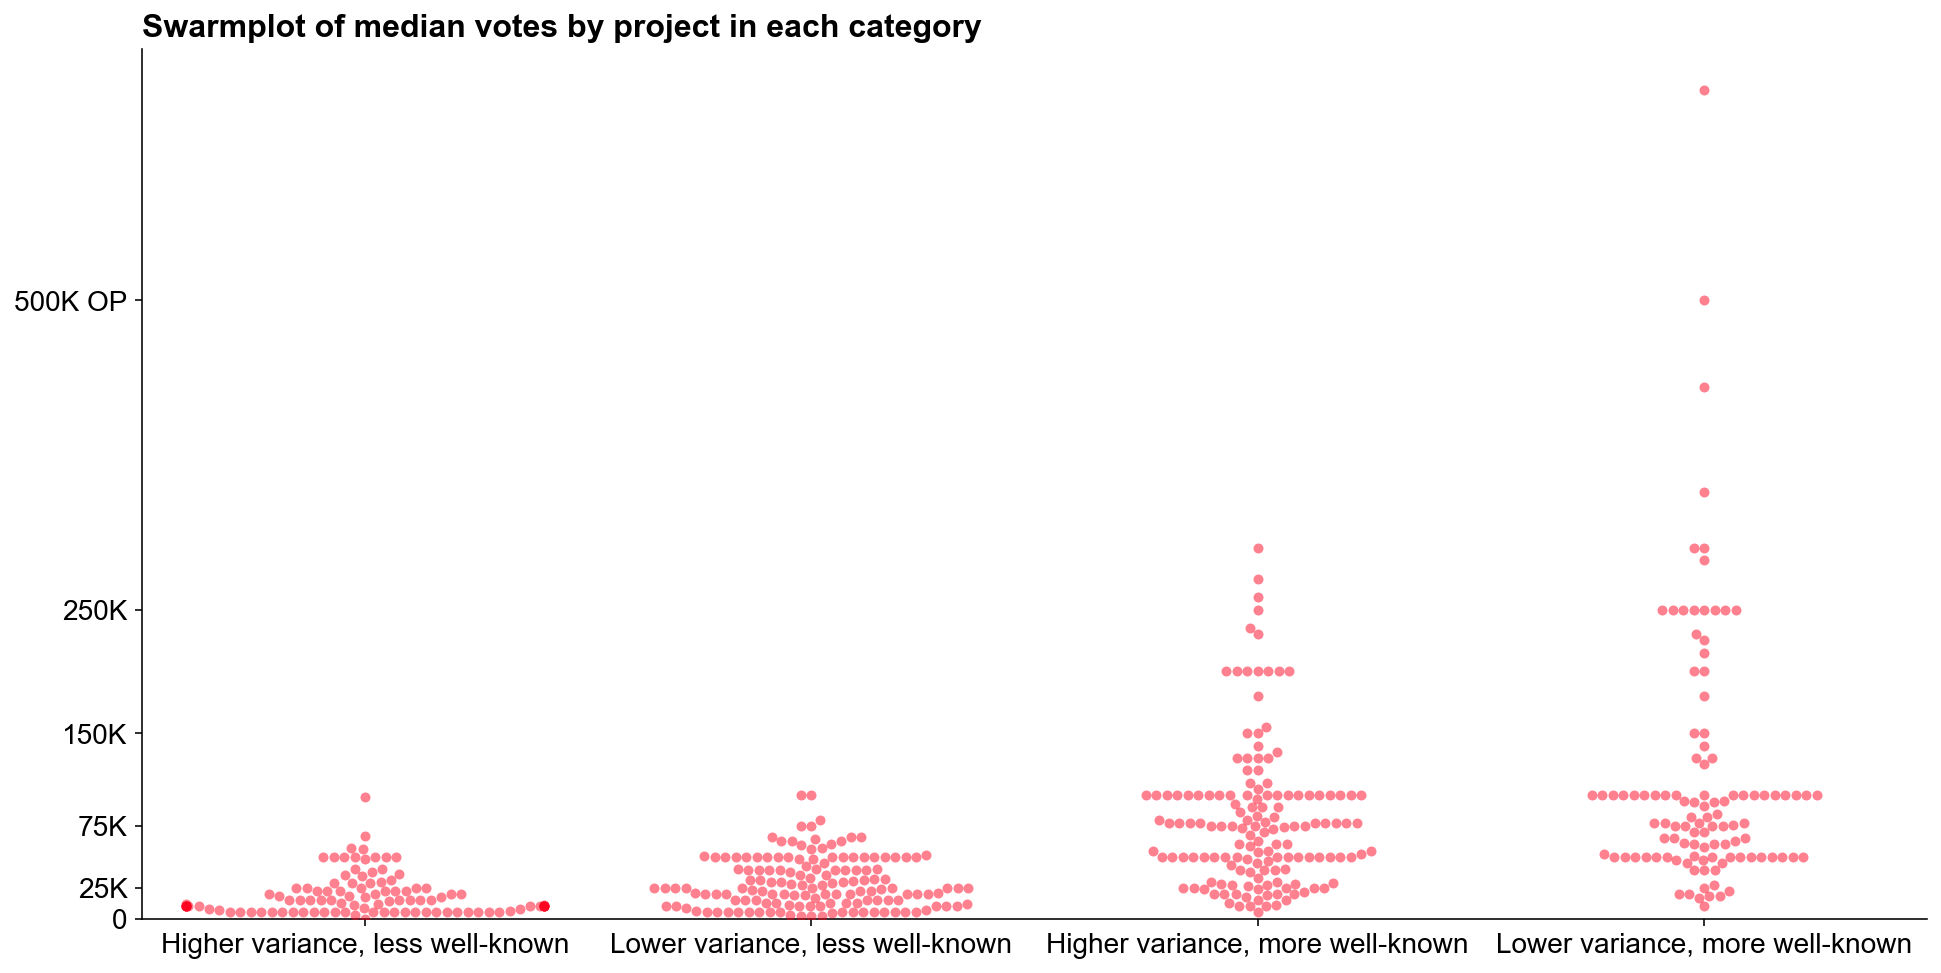 More well-known projects had a higher median